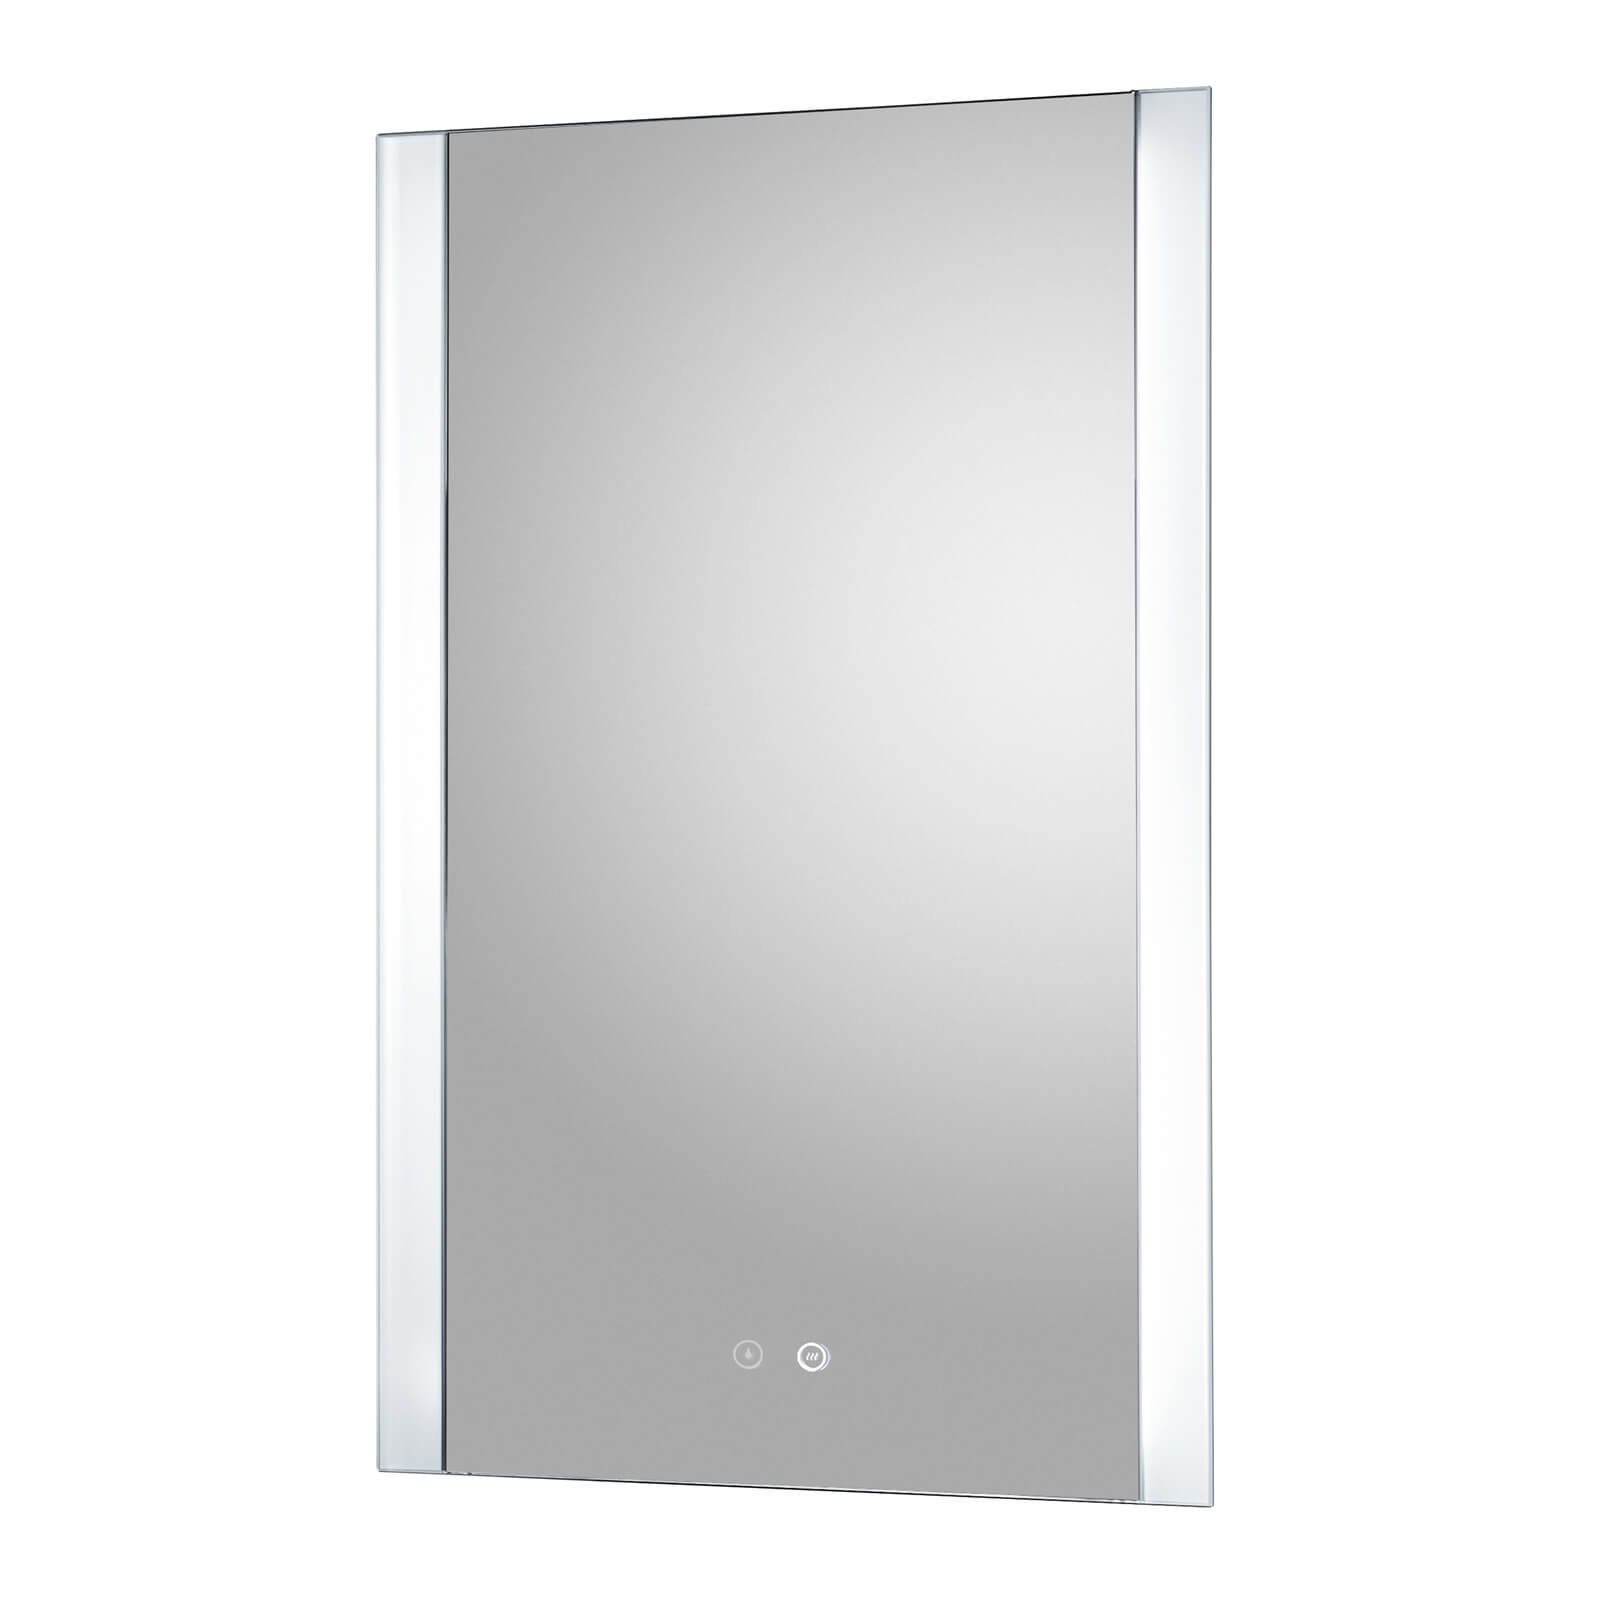 Photo of 500 Led Backlit Touch Sensor Mirror 20w